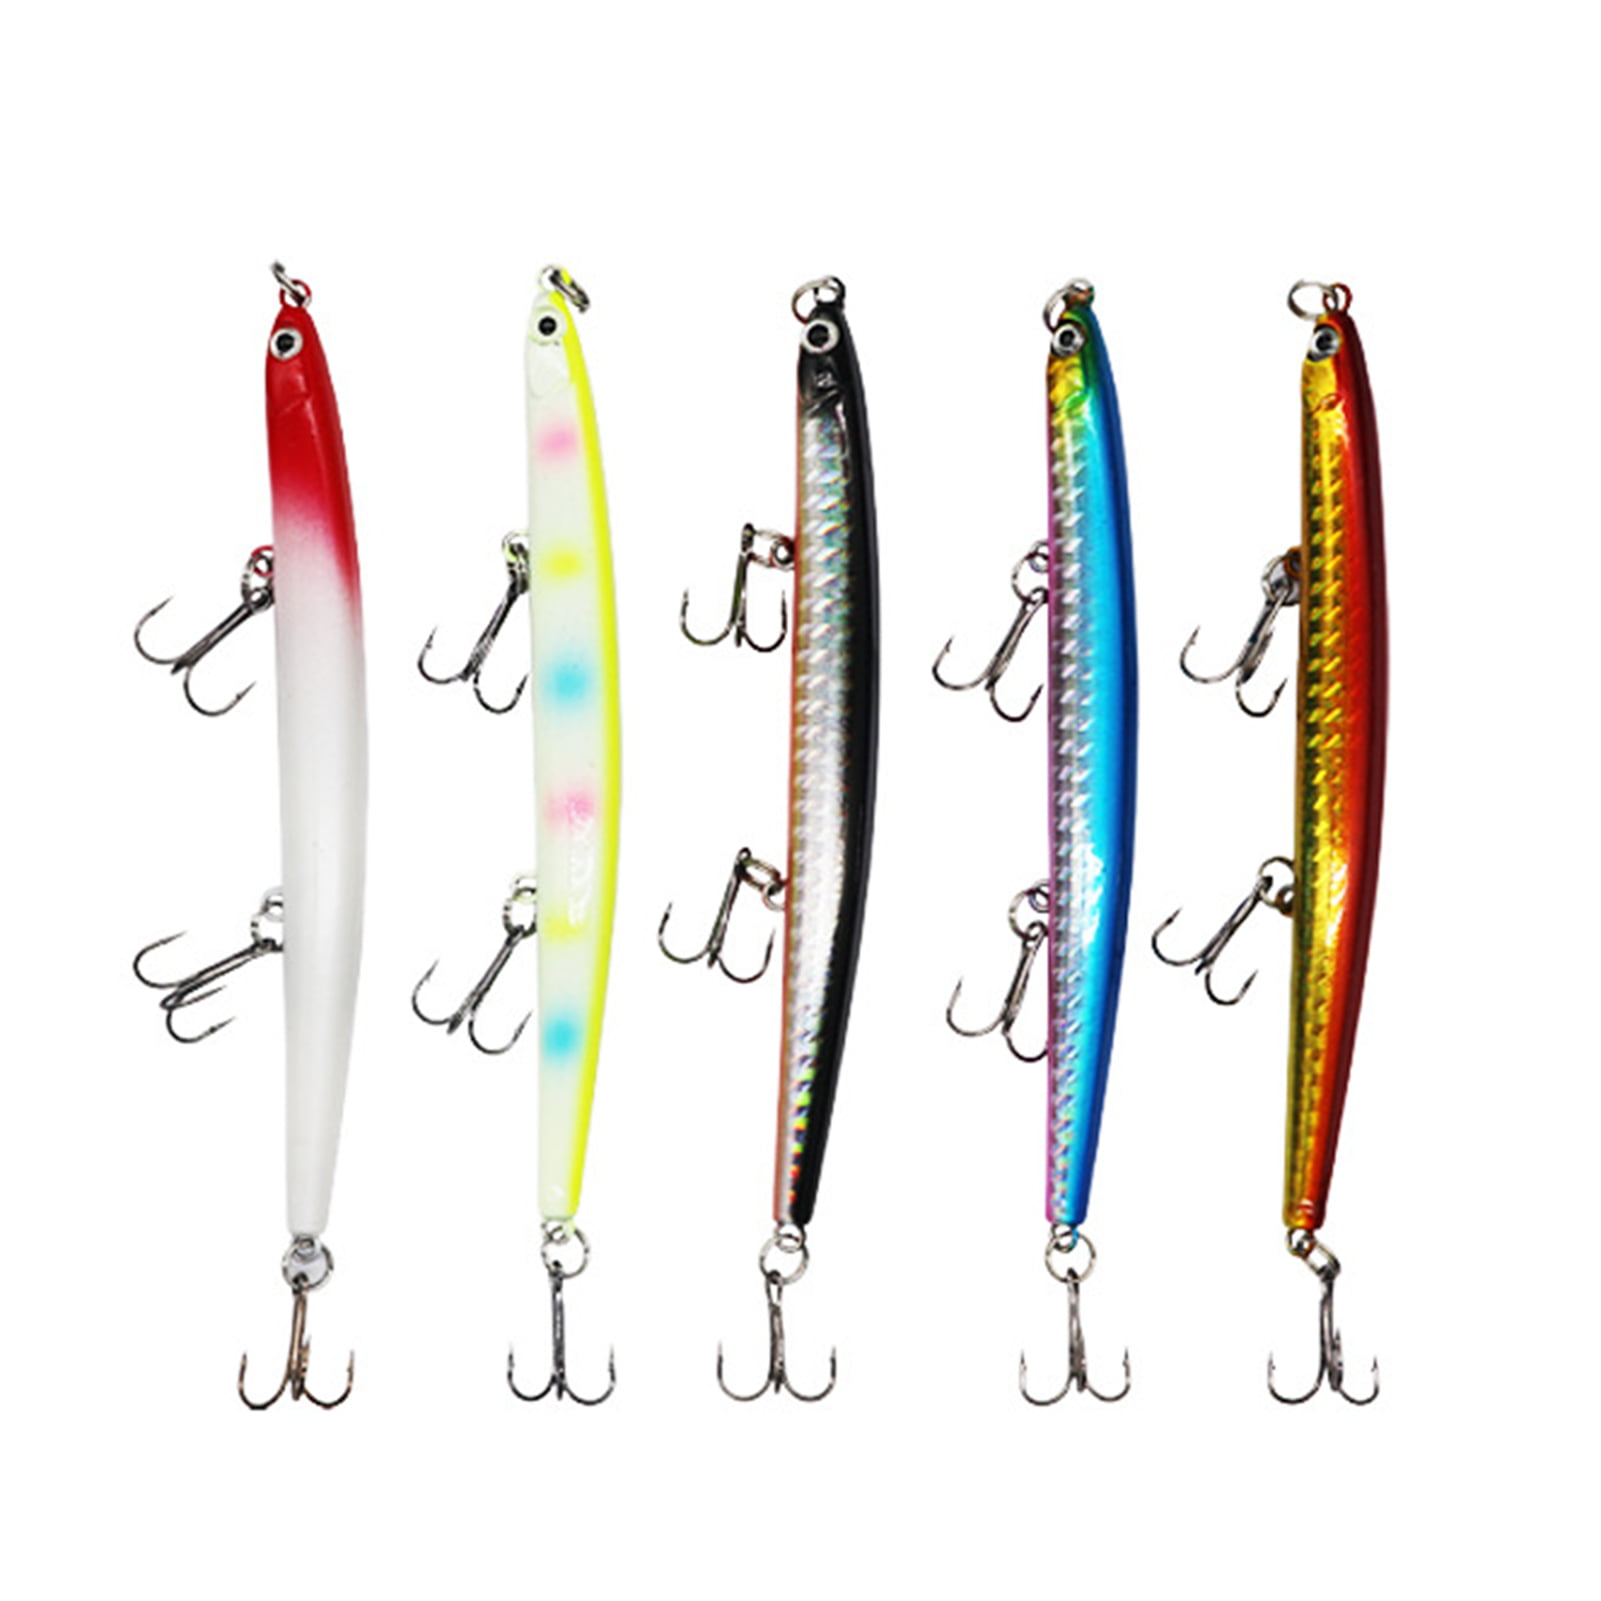 13cm 15g 1PC Minnow Baits Fishing Lures Artificial Fish Attachments Accessories 